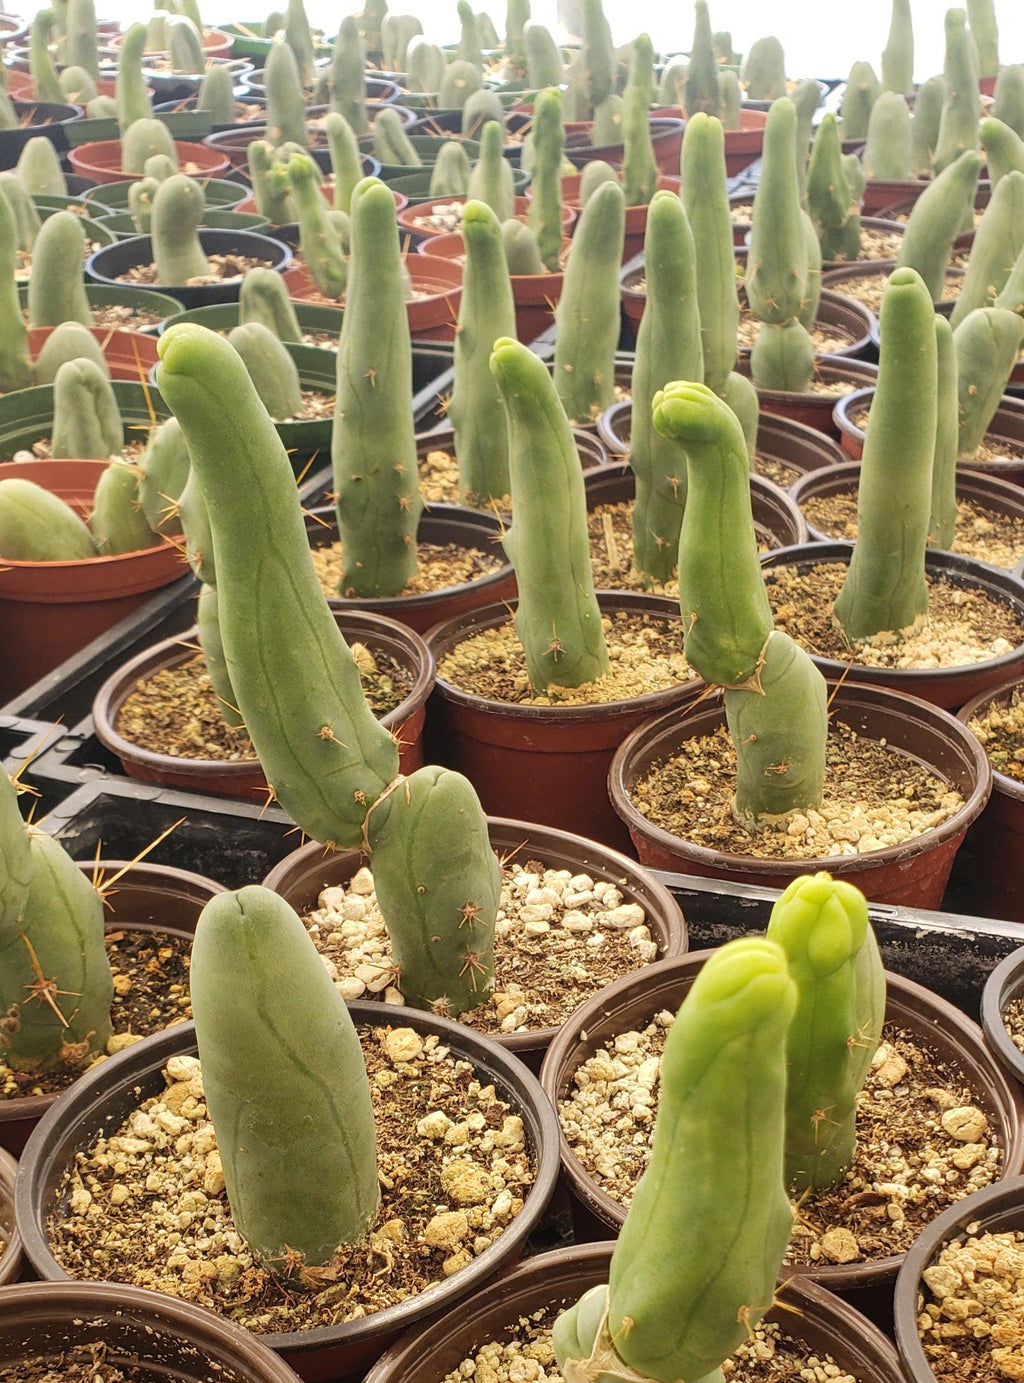 Tall Cactus For Sale Melbourne | homehospice-jp.org